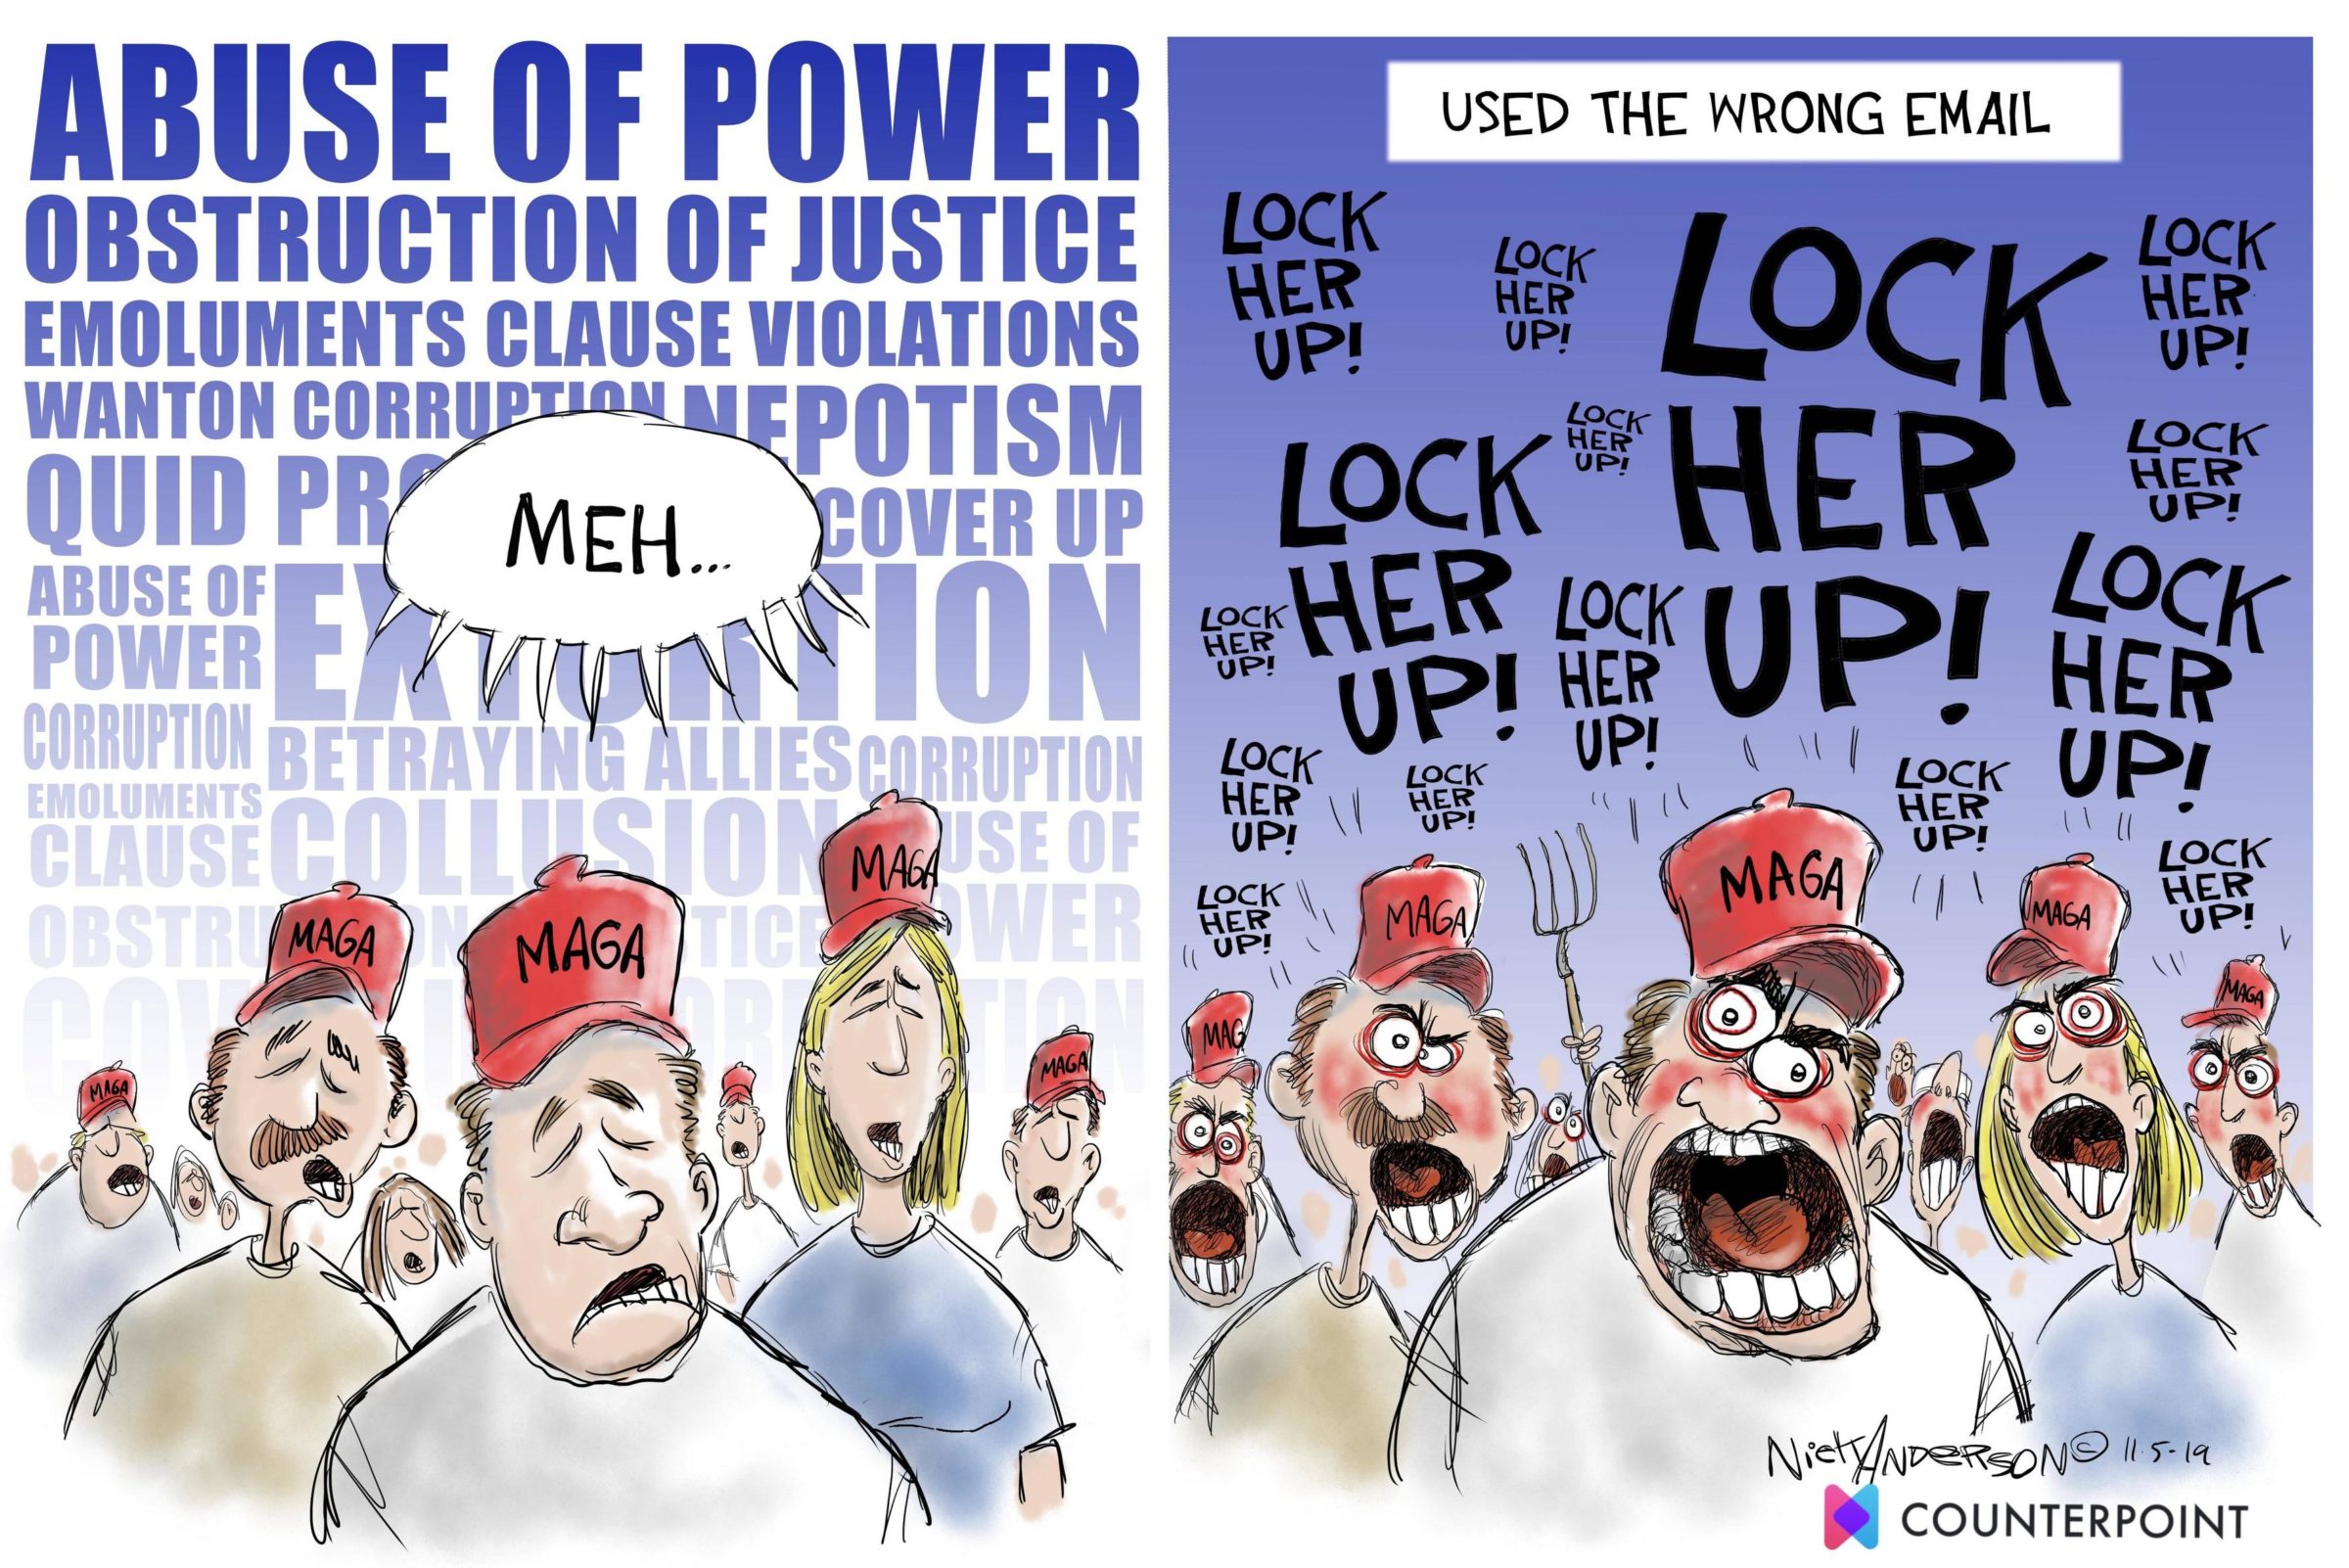 political political-memes political text: ABUSE OF POWER OBSTRUCTION OF JUSTICE EMOLUMENTS CLAUSE VIOLATIONS WANTON CORR QUID P ABUSE OF POTISM ,OVER UP MER... 5 LOCK LOCK* LOCK LOCK HER HER LOCK HER LOCKUP! LOCK up! HER LOCK LOCK HER HER \ LOCK MIACA LOCK HER LOCK HER M,A64' 9 6 Nie Il f/ IQ COUNTERPOINT 